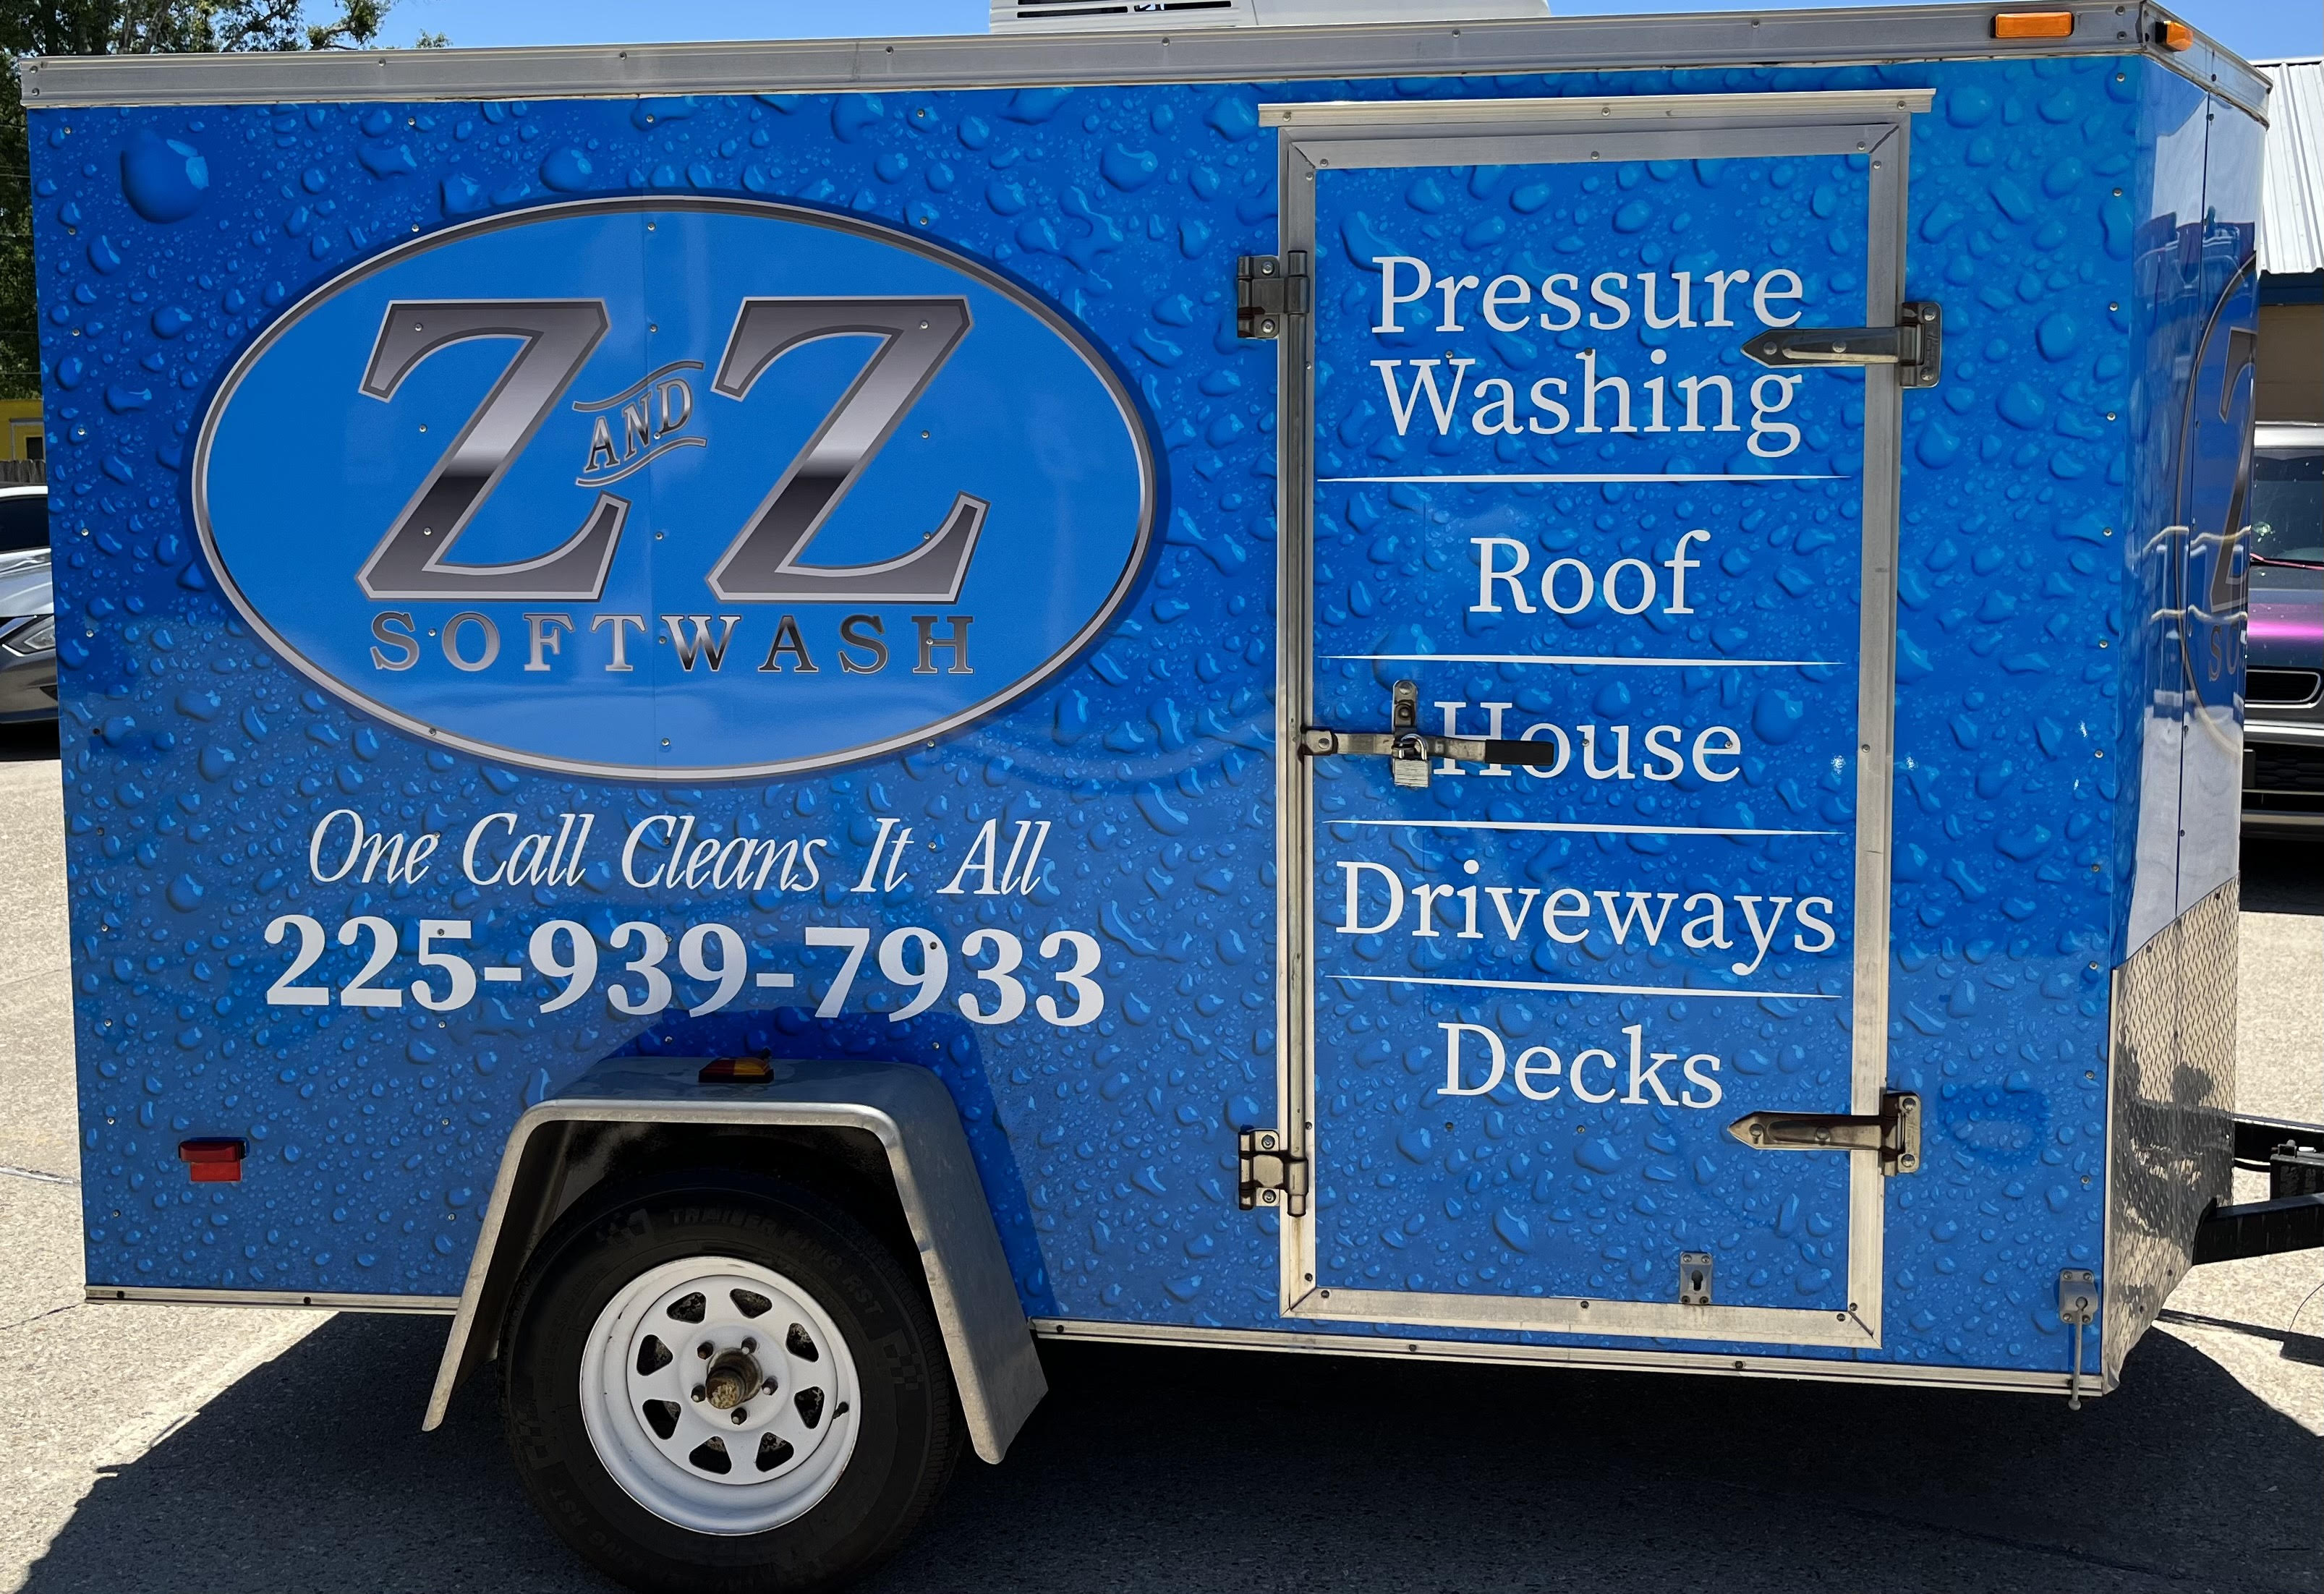 Z and Z Soft Wash Roof and Exterior Cleaning Logo